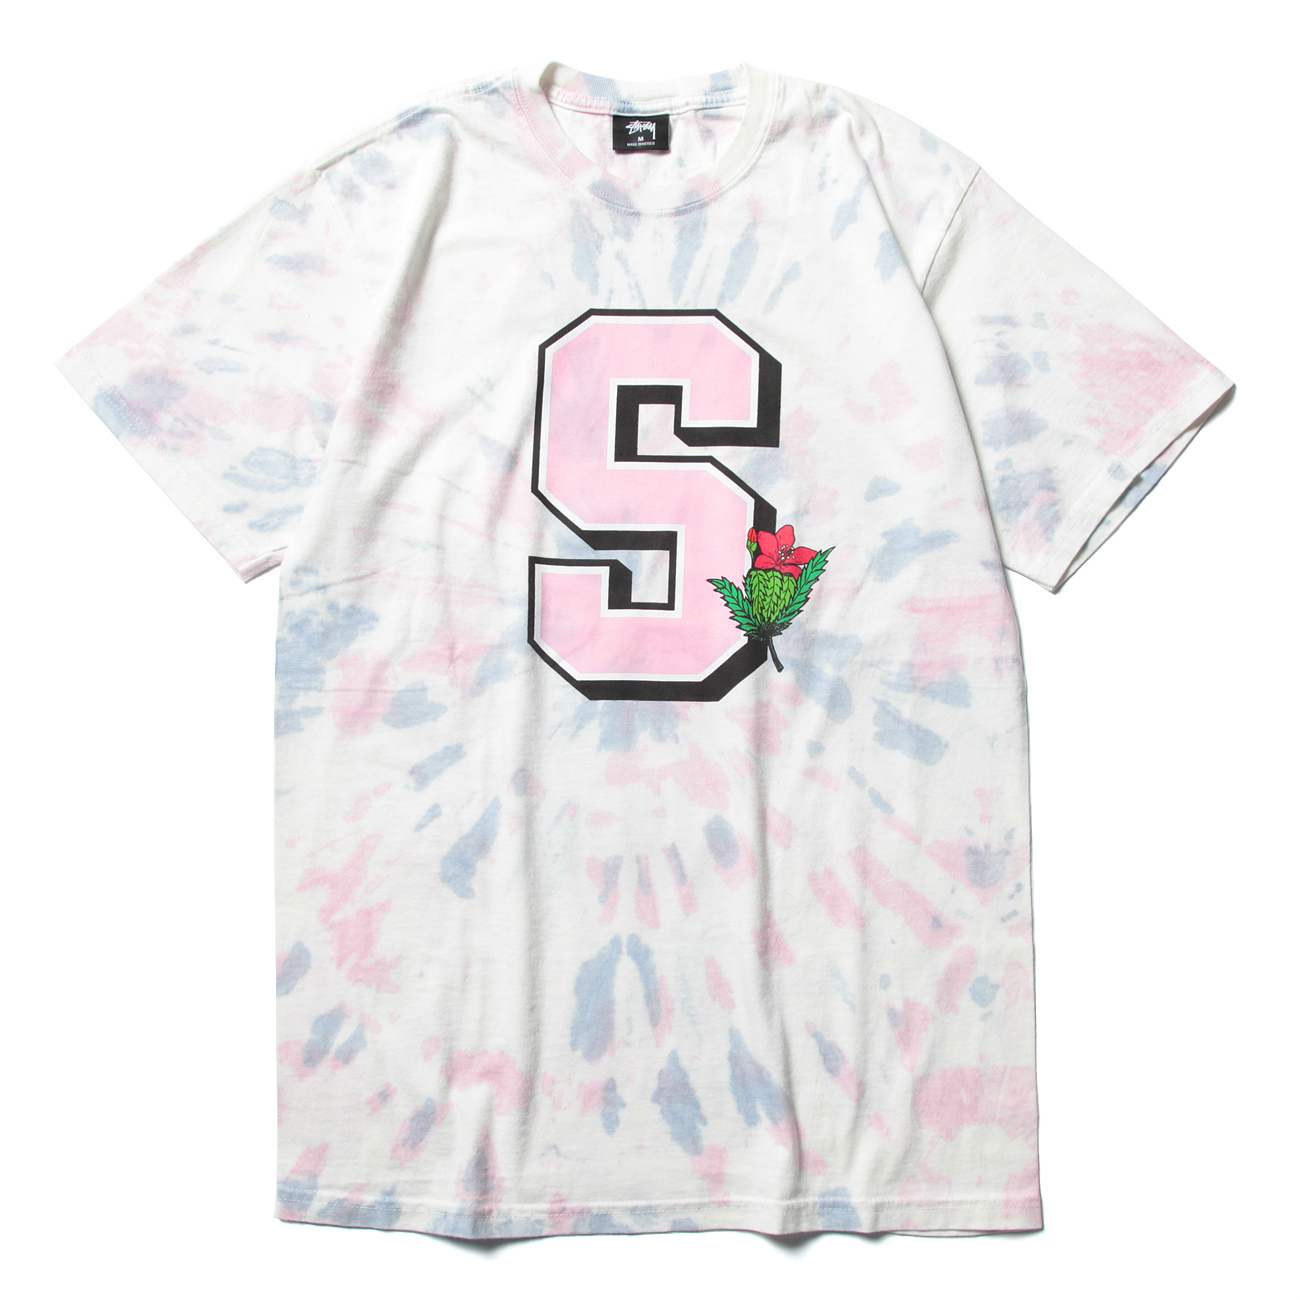 Stussy ステューシー University Td Tee Natural Pink 通販 正規取扱店 Collect Store コレクトストア